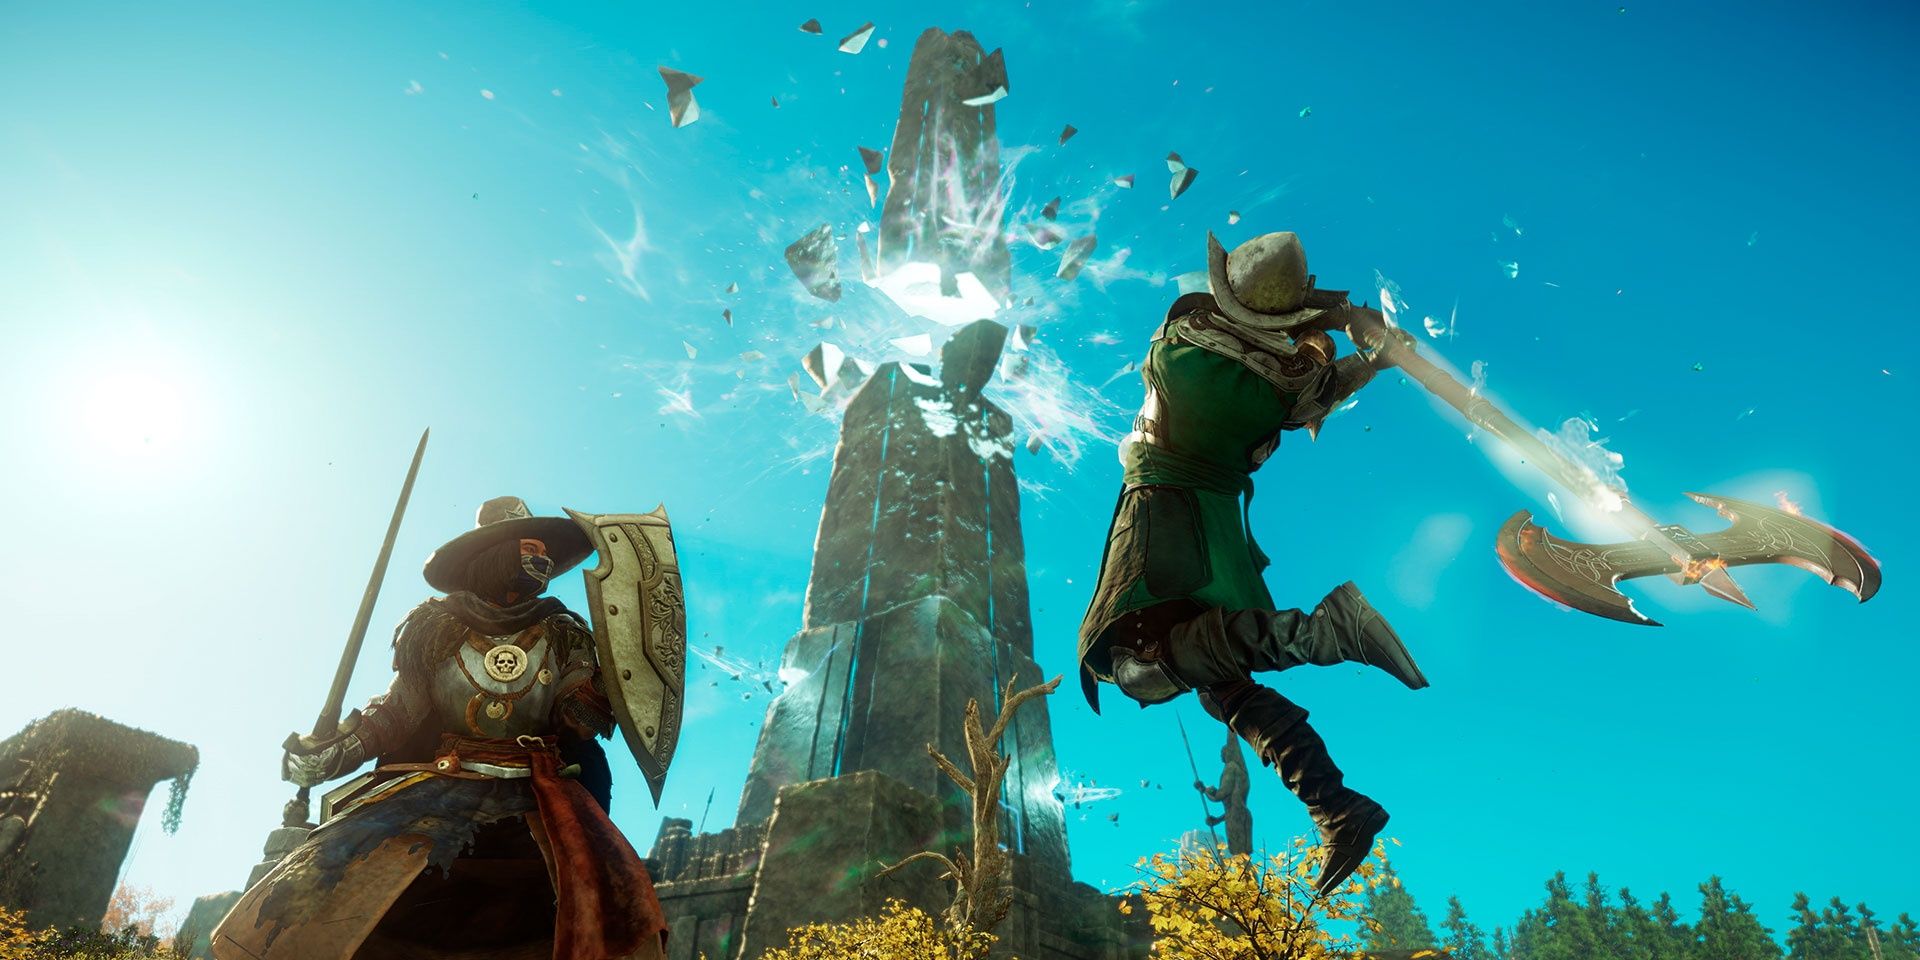 A screenshot showing two players dueling in New World